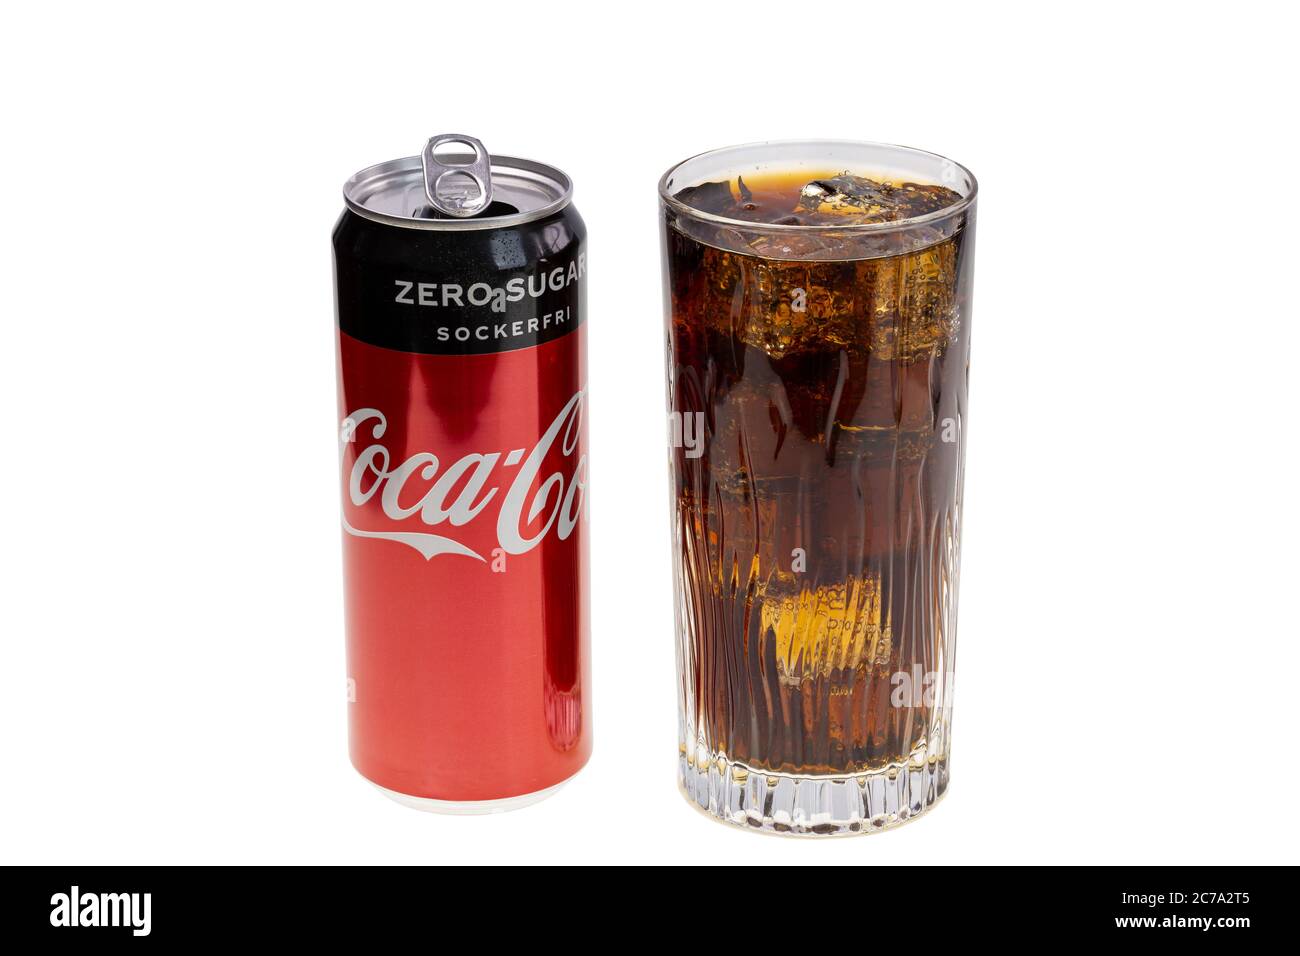 https://c8.alamy.com/comp/2C7A2T5/close-up-view-of-open-cocs-can-and-soda-with-ice-in-crystal-glass-drink-concept-health-concept-2C7A2T5.jpg